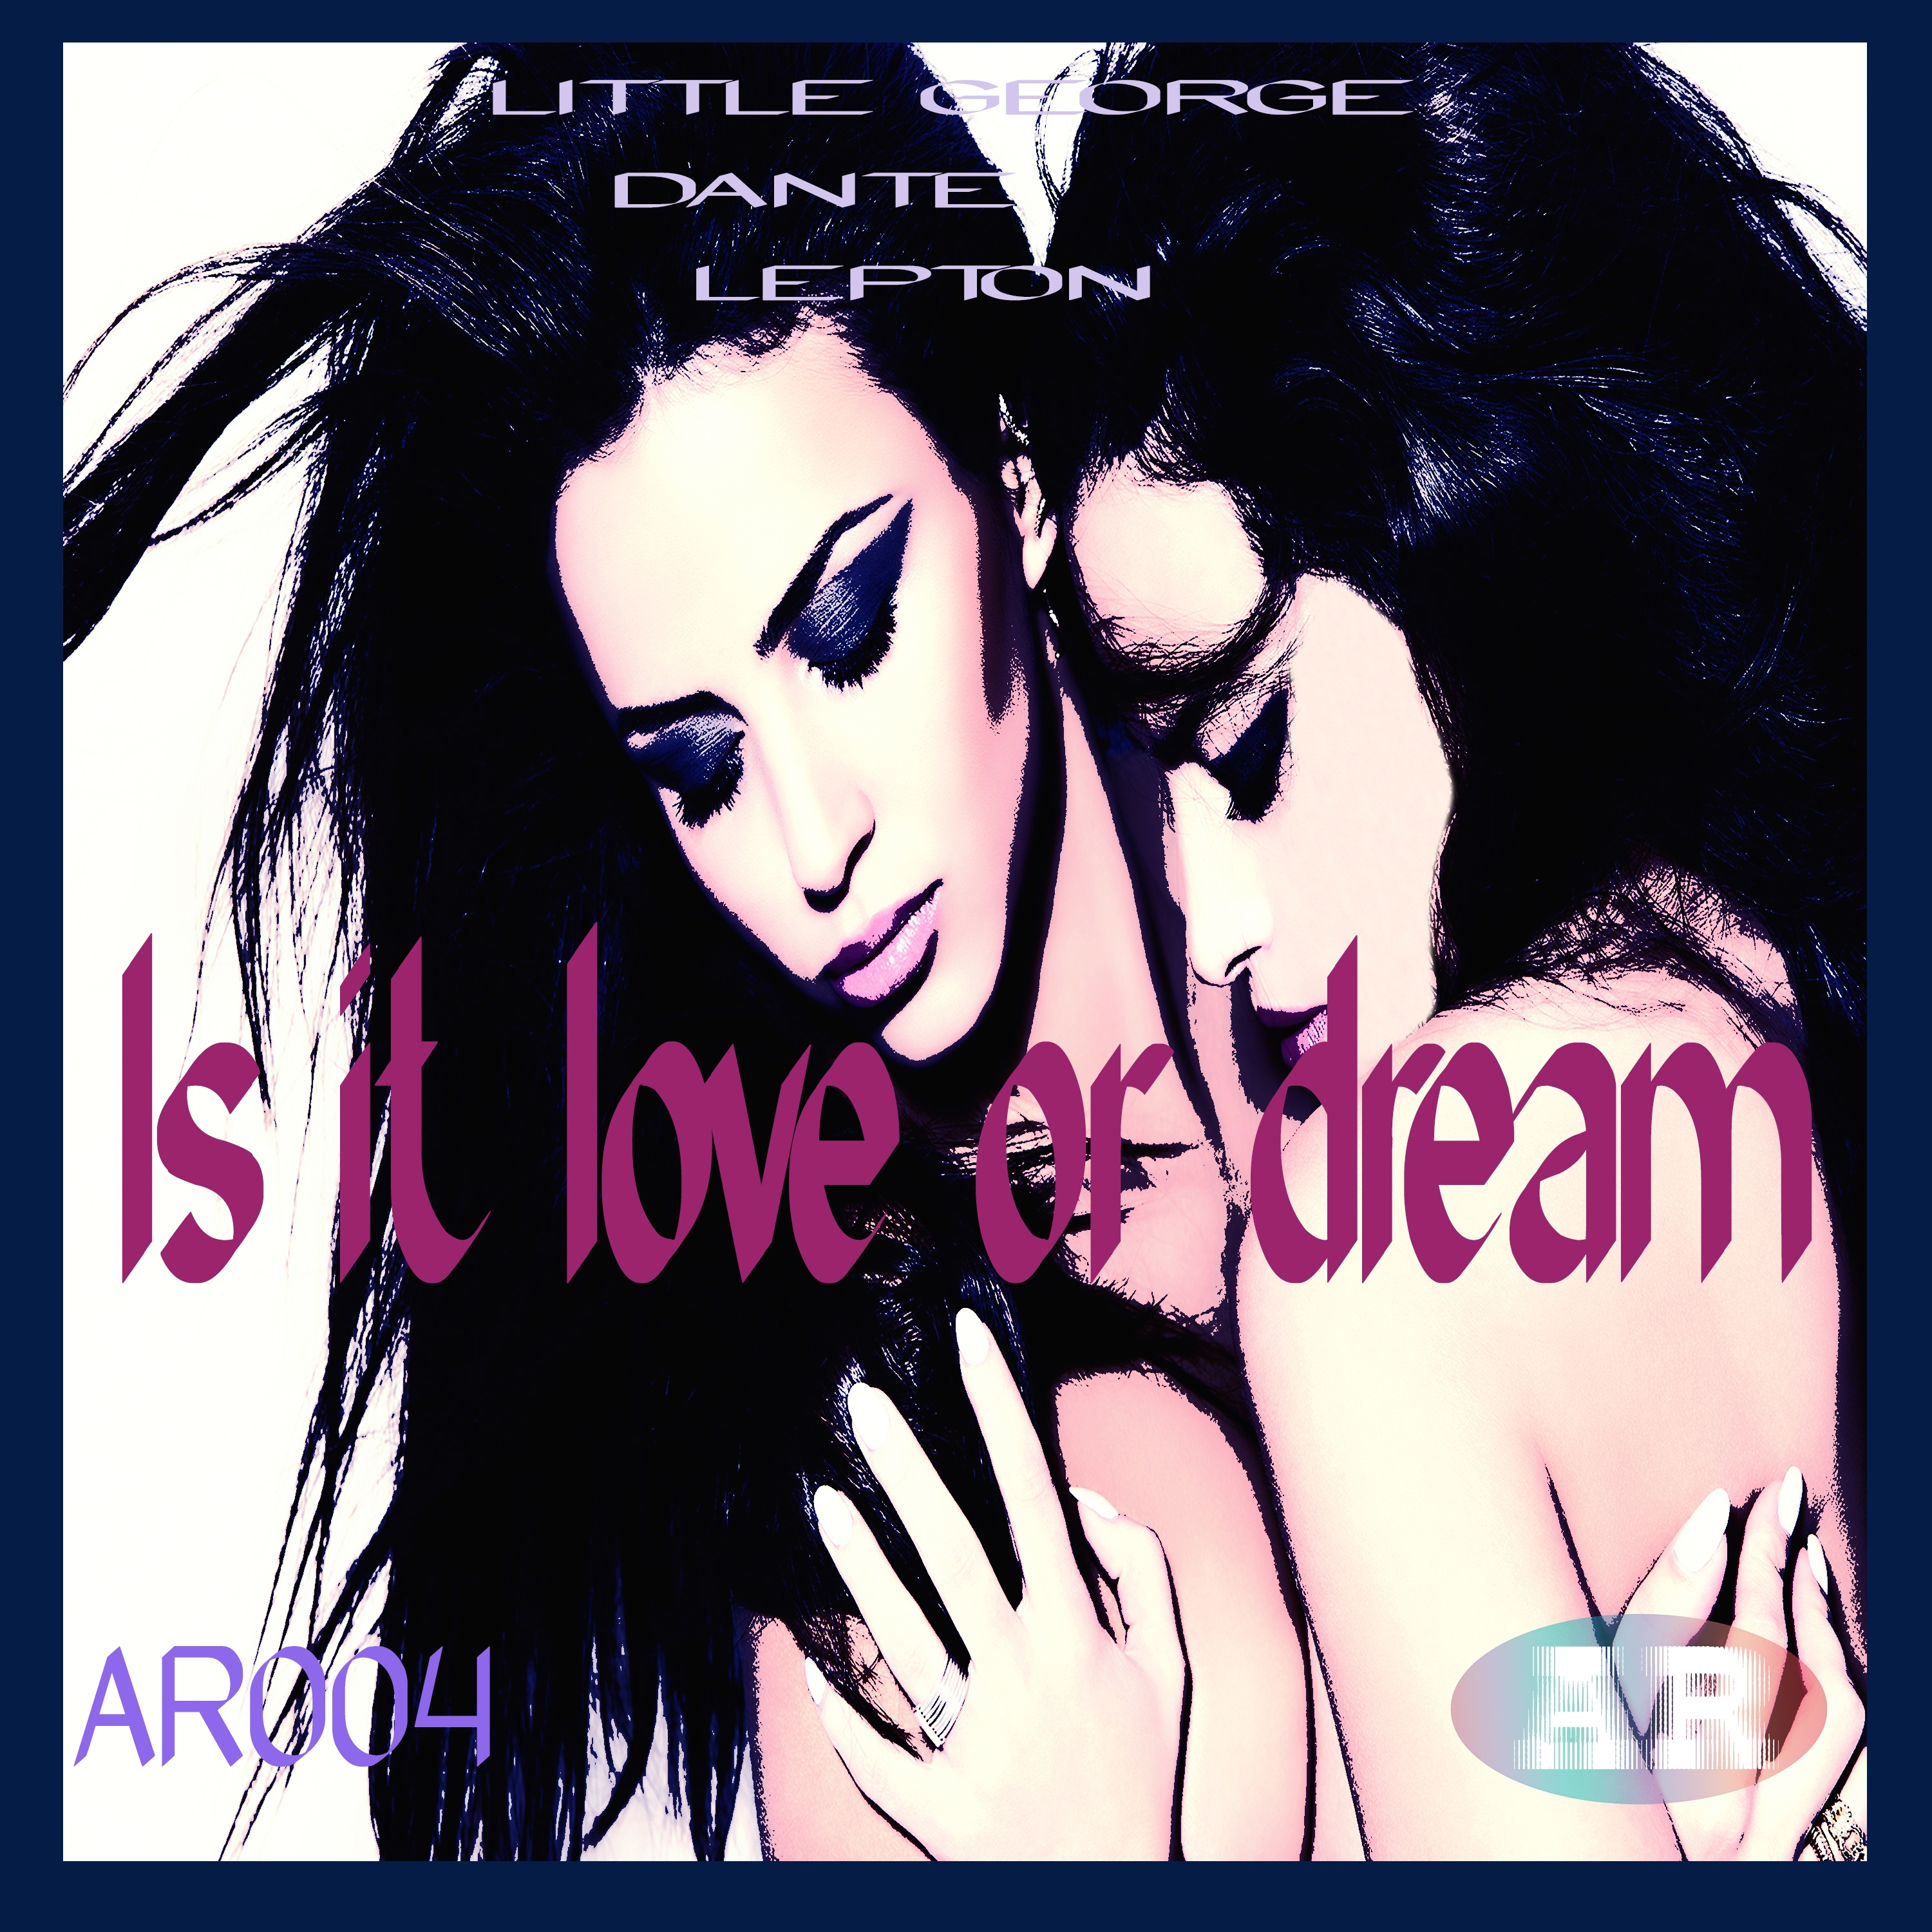 Is It Love or Dream